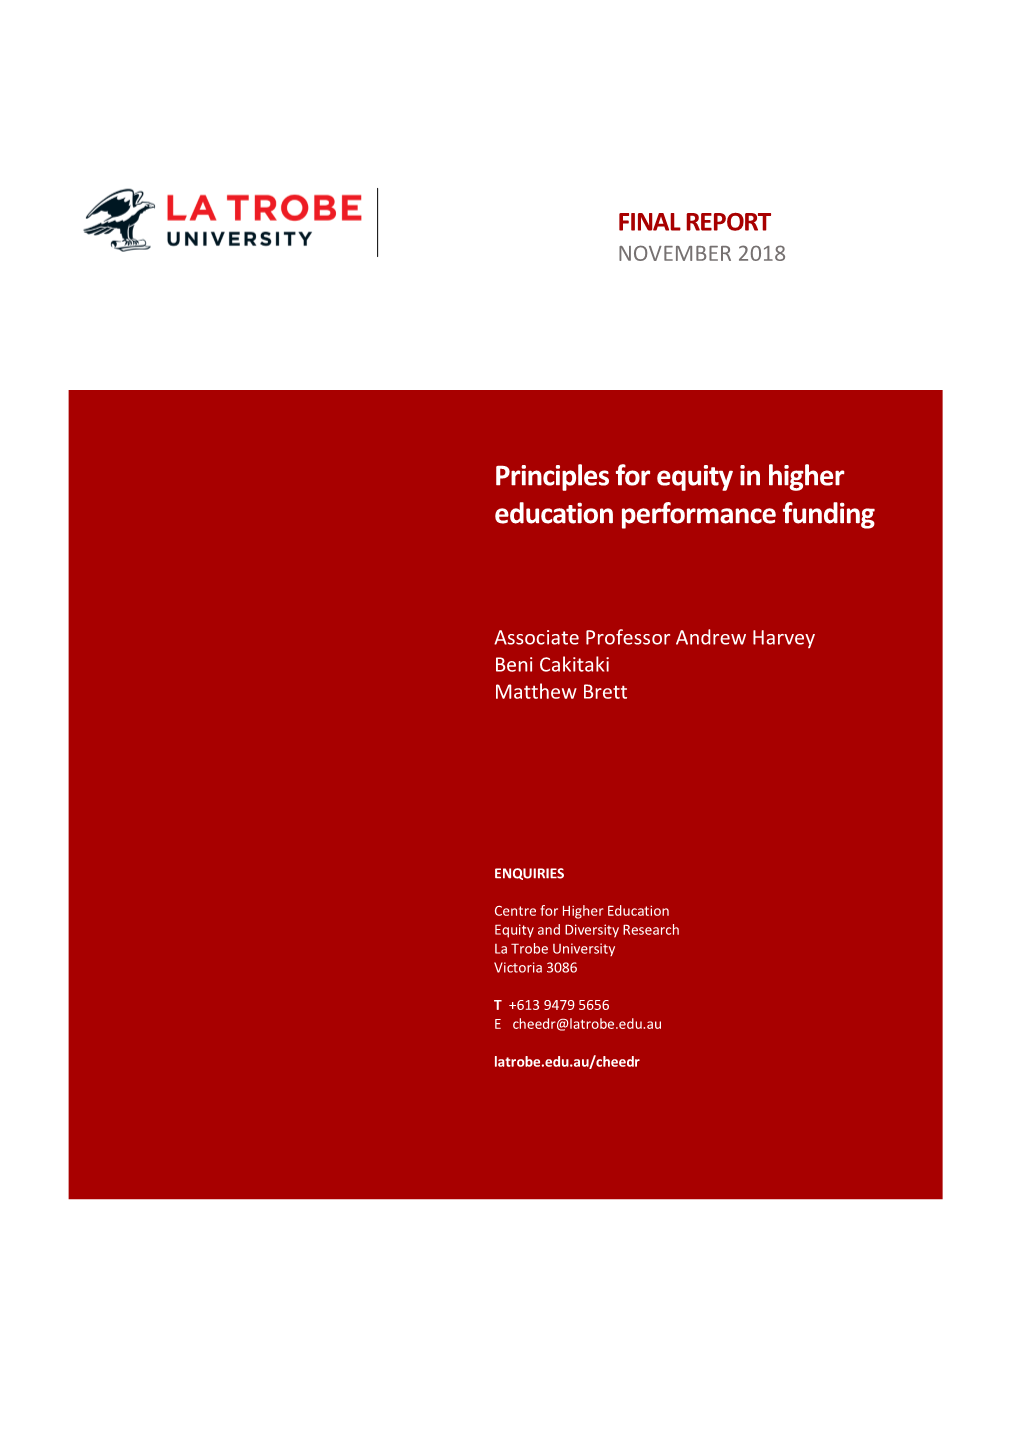 Principles for Equity in Higher Education Performance Funding